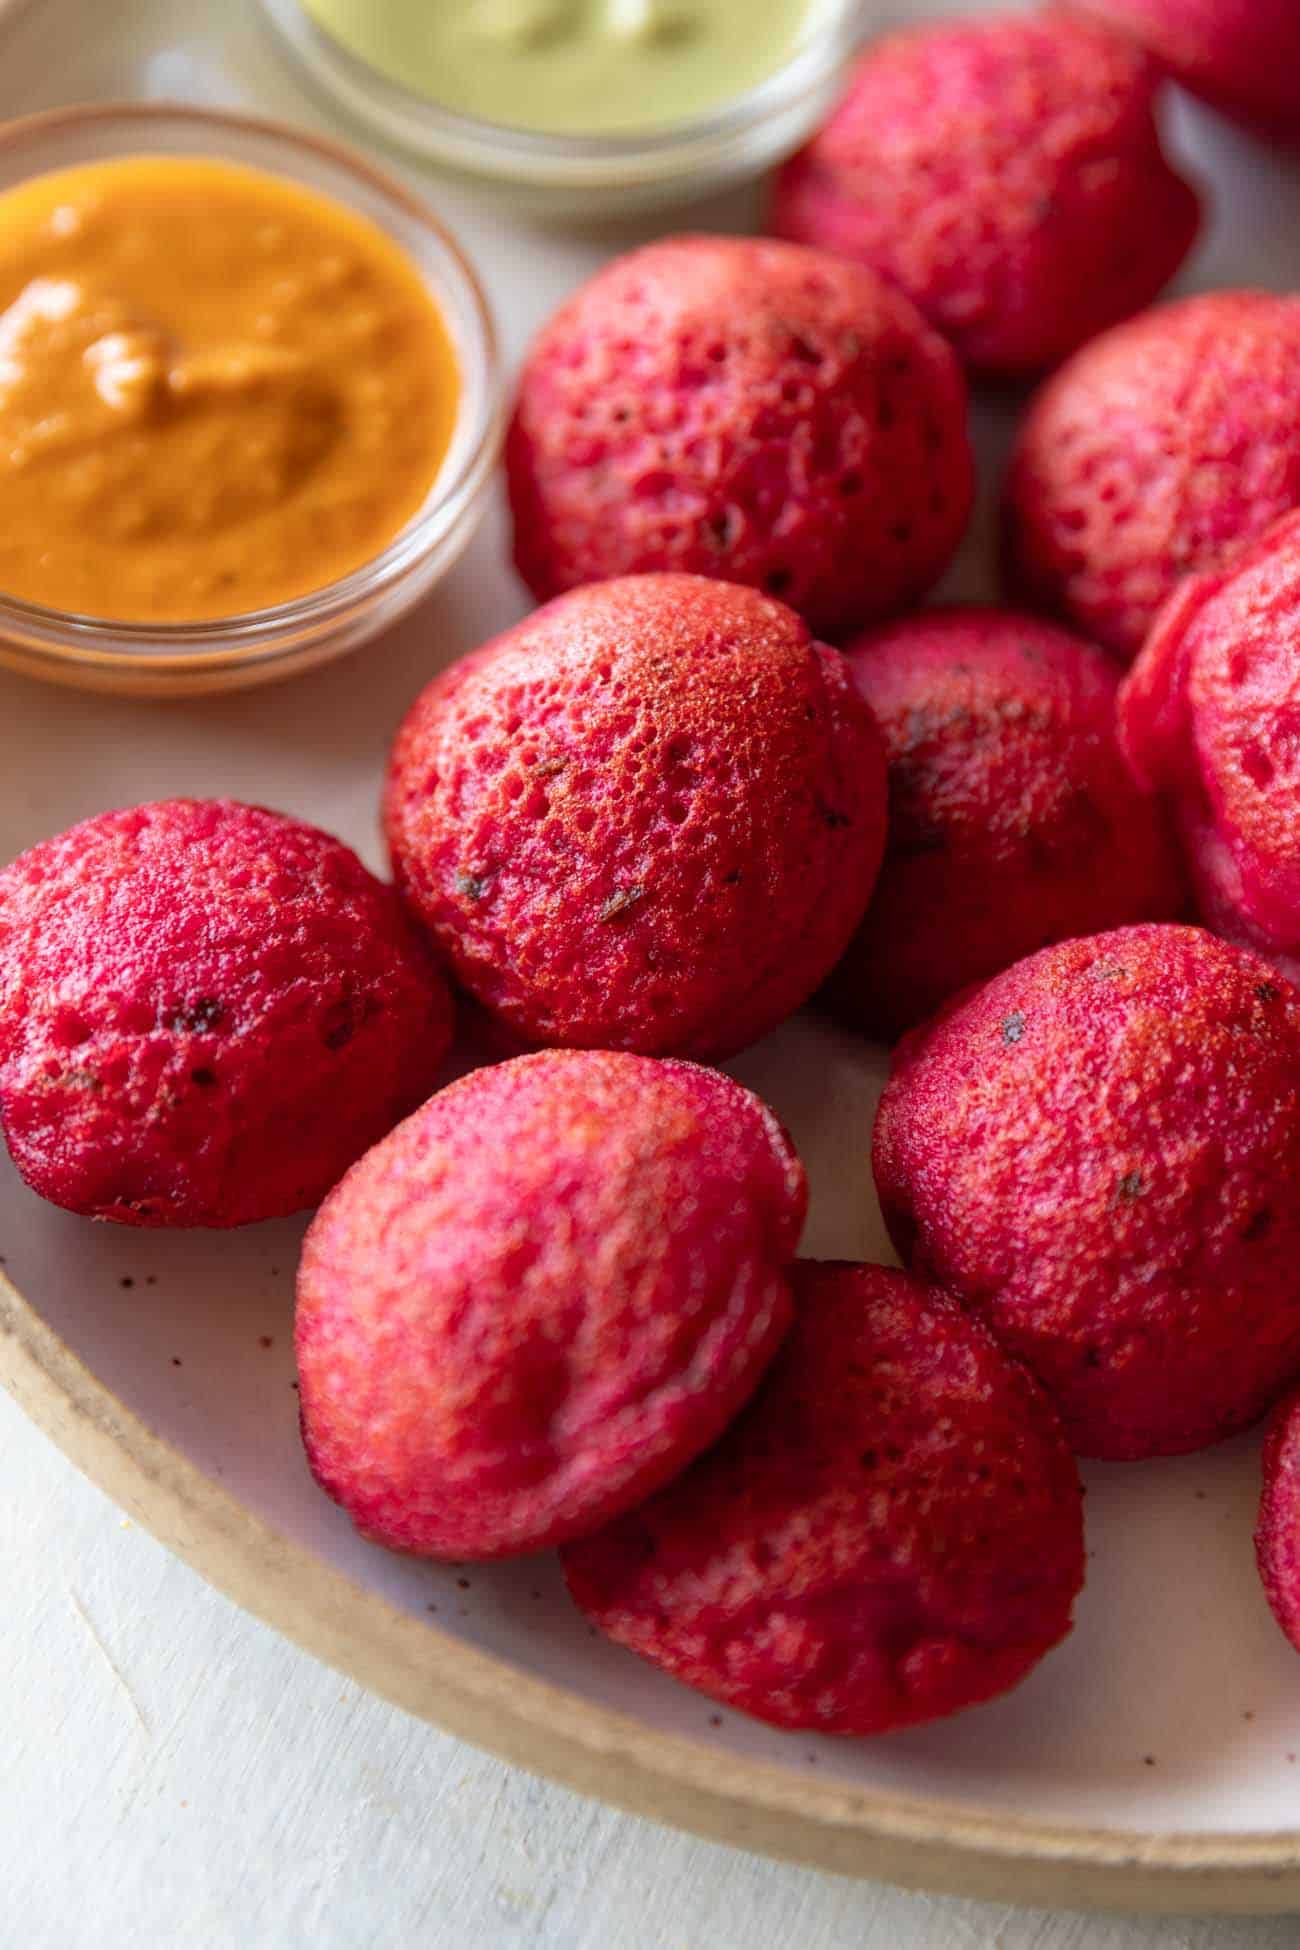 Beetroot appe served on a plate with chutney on the side